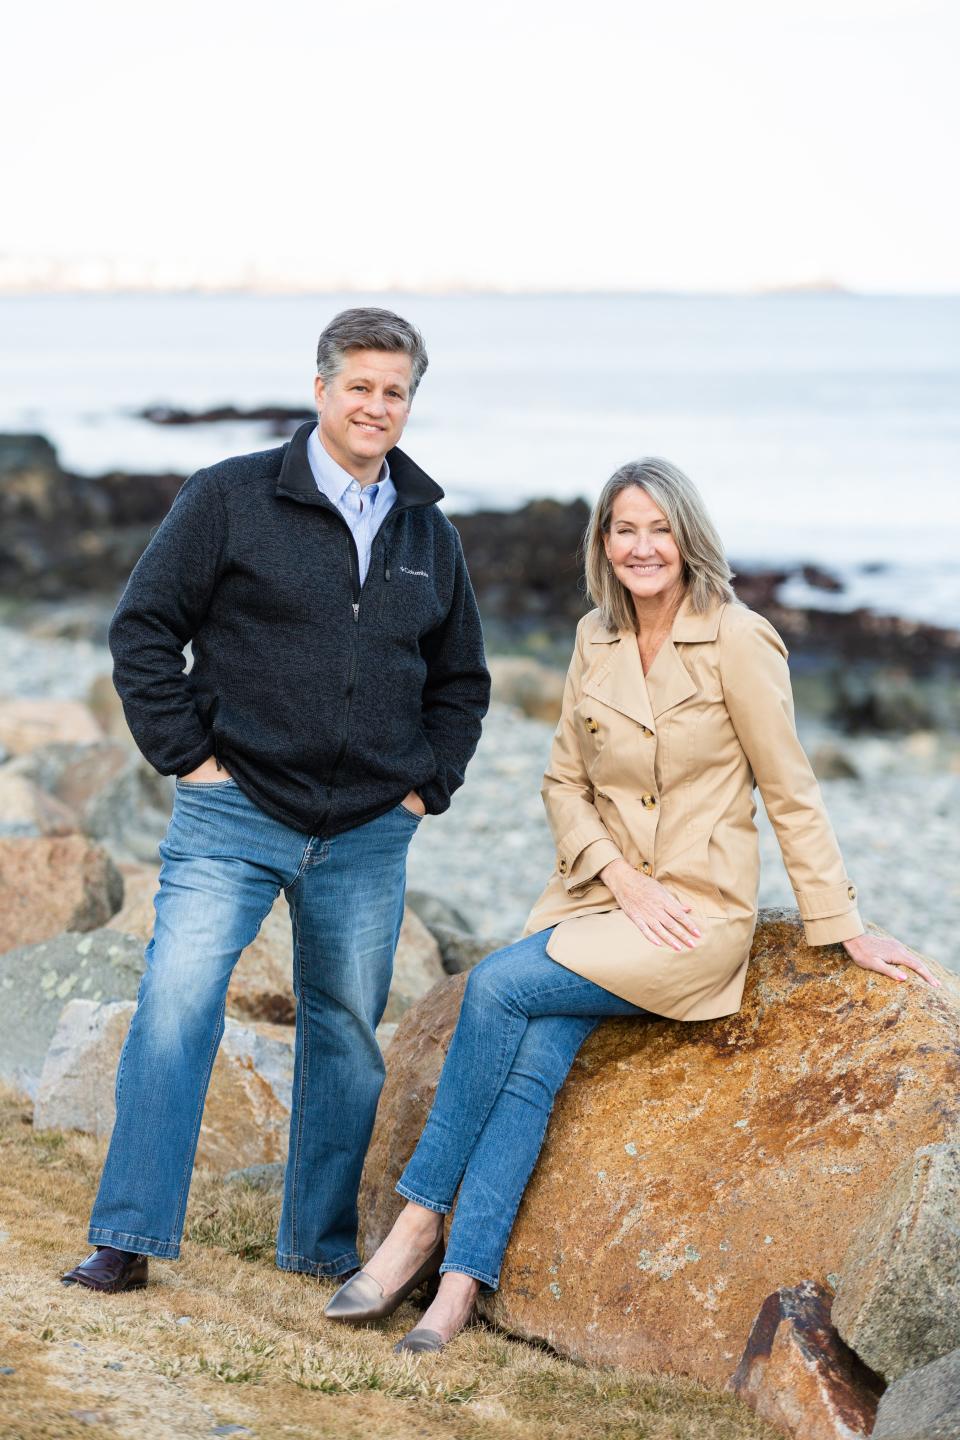 Jane Chase and Jim Nadeau